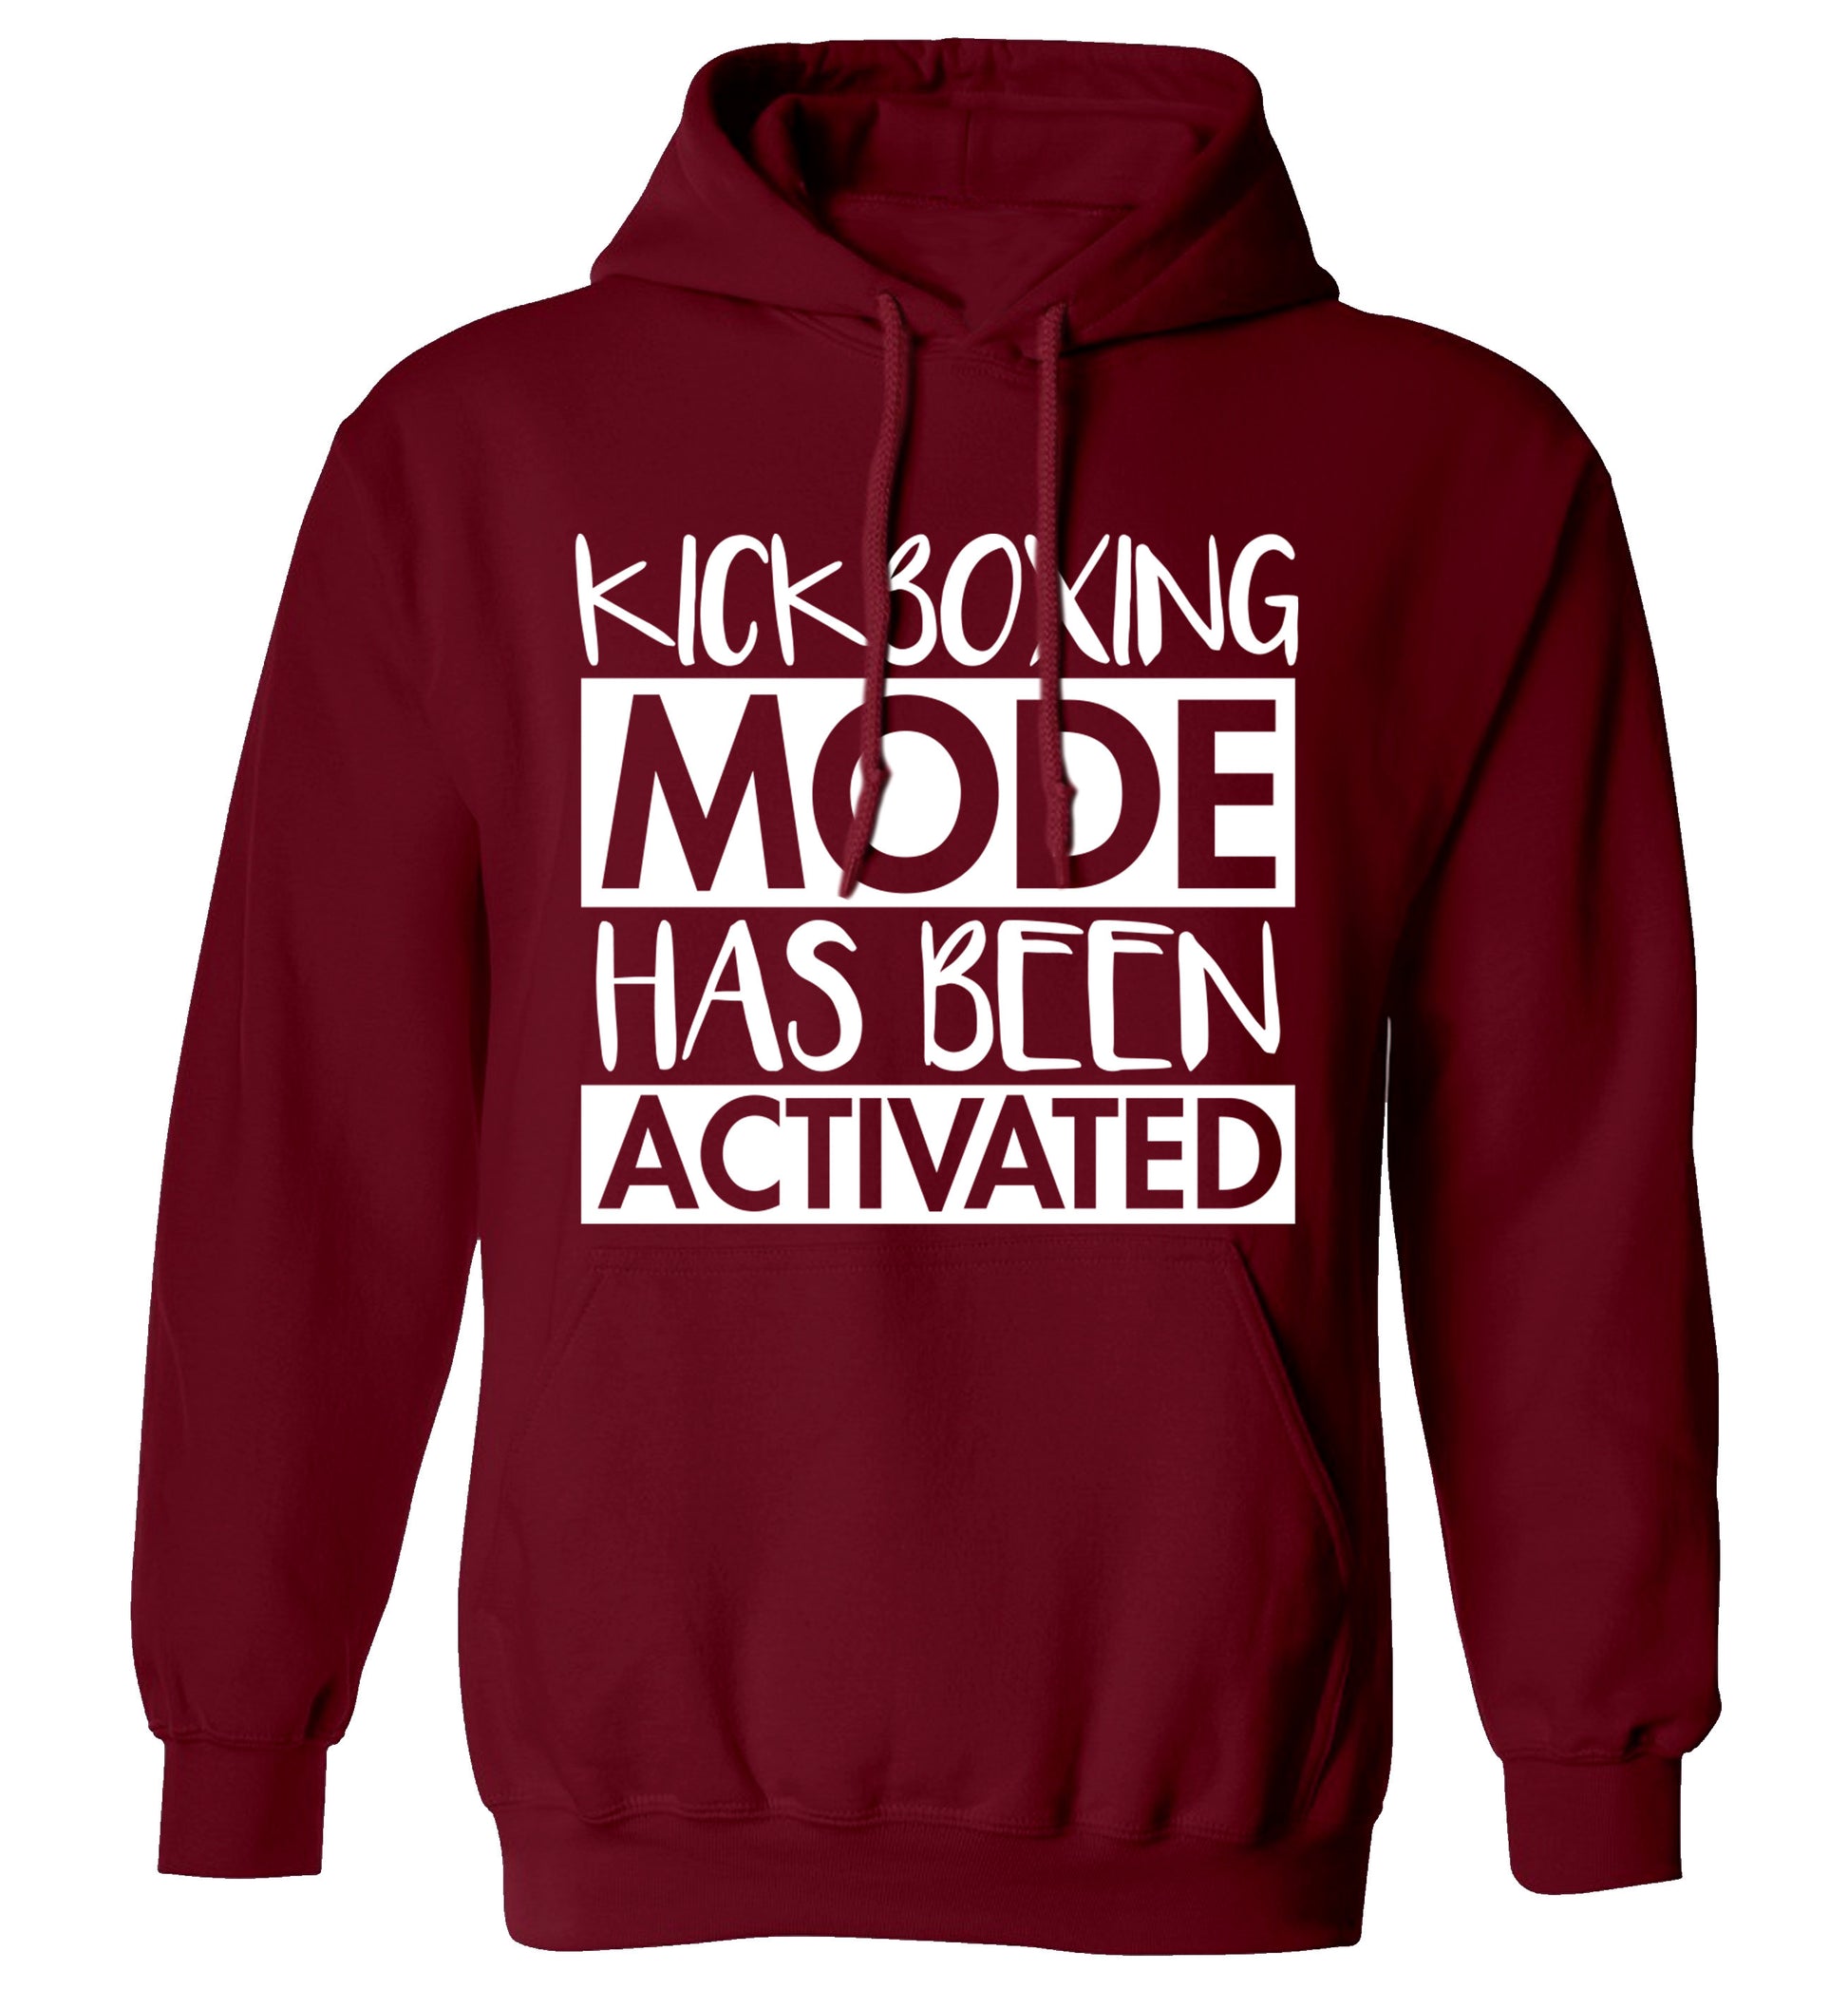 Kickboxing mode activated adults unisex maroon hoodie 2XL